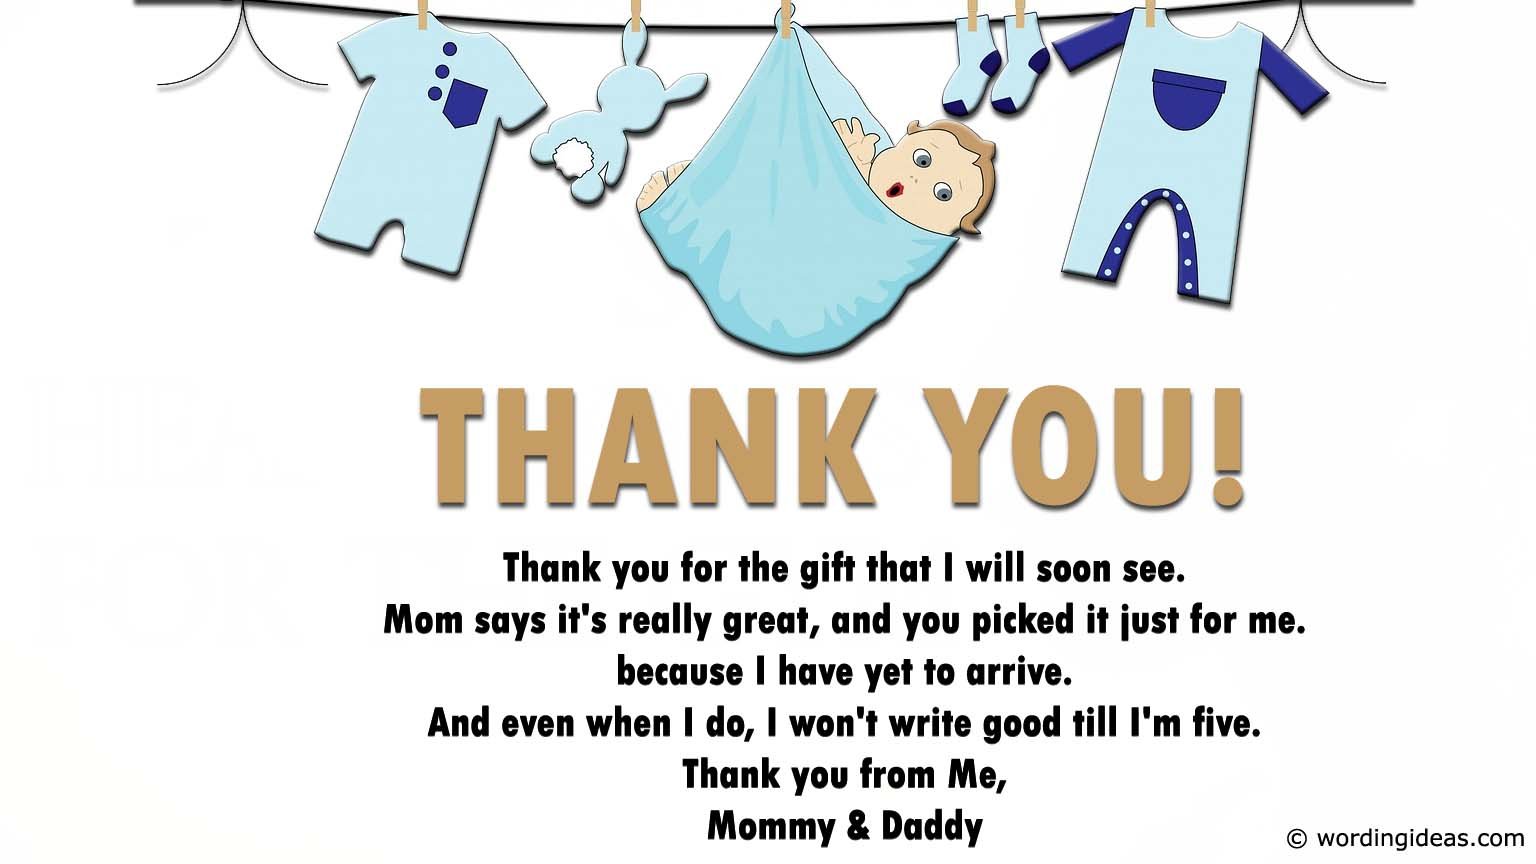 Baby Shower Thank You Wording: Tips, Ideas, and Examples » Wording